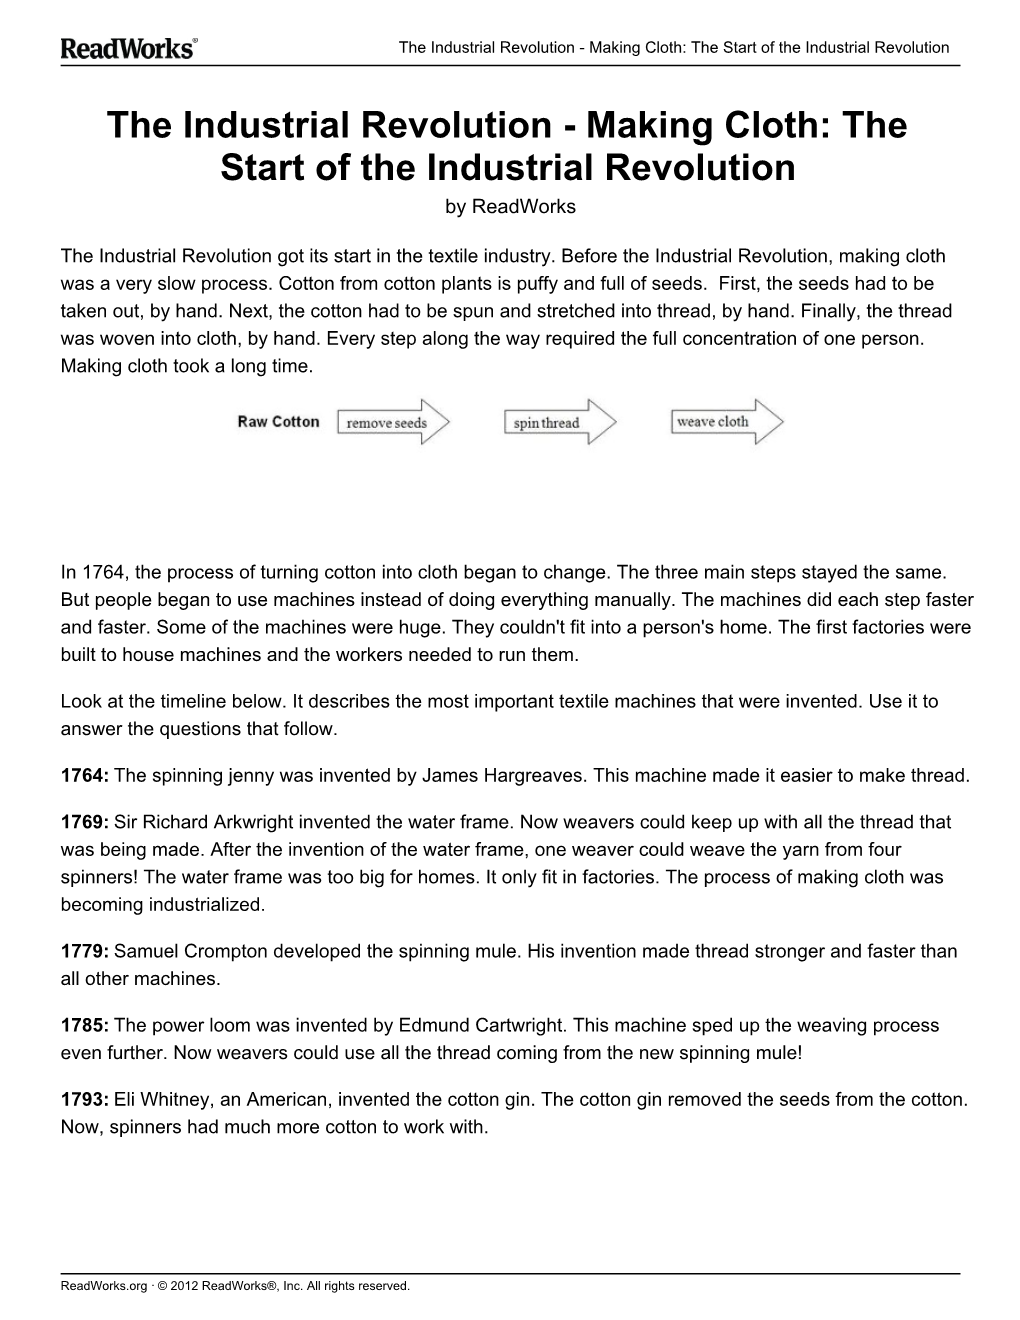 The Industrial Revolution - Making Cloth: the Start of the Industrial Revolution